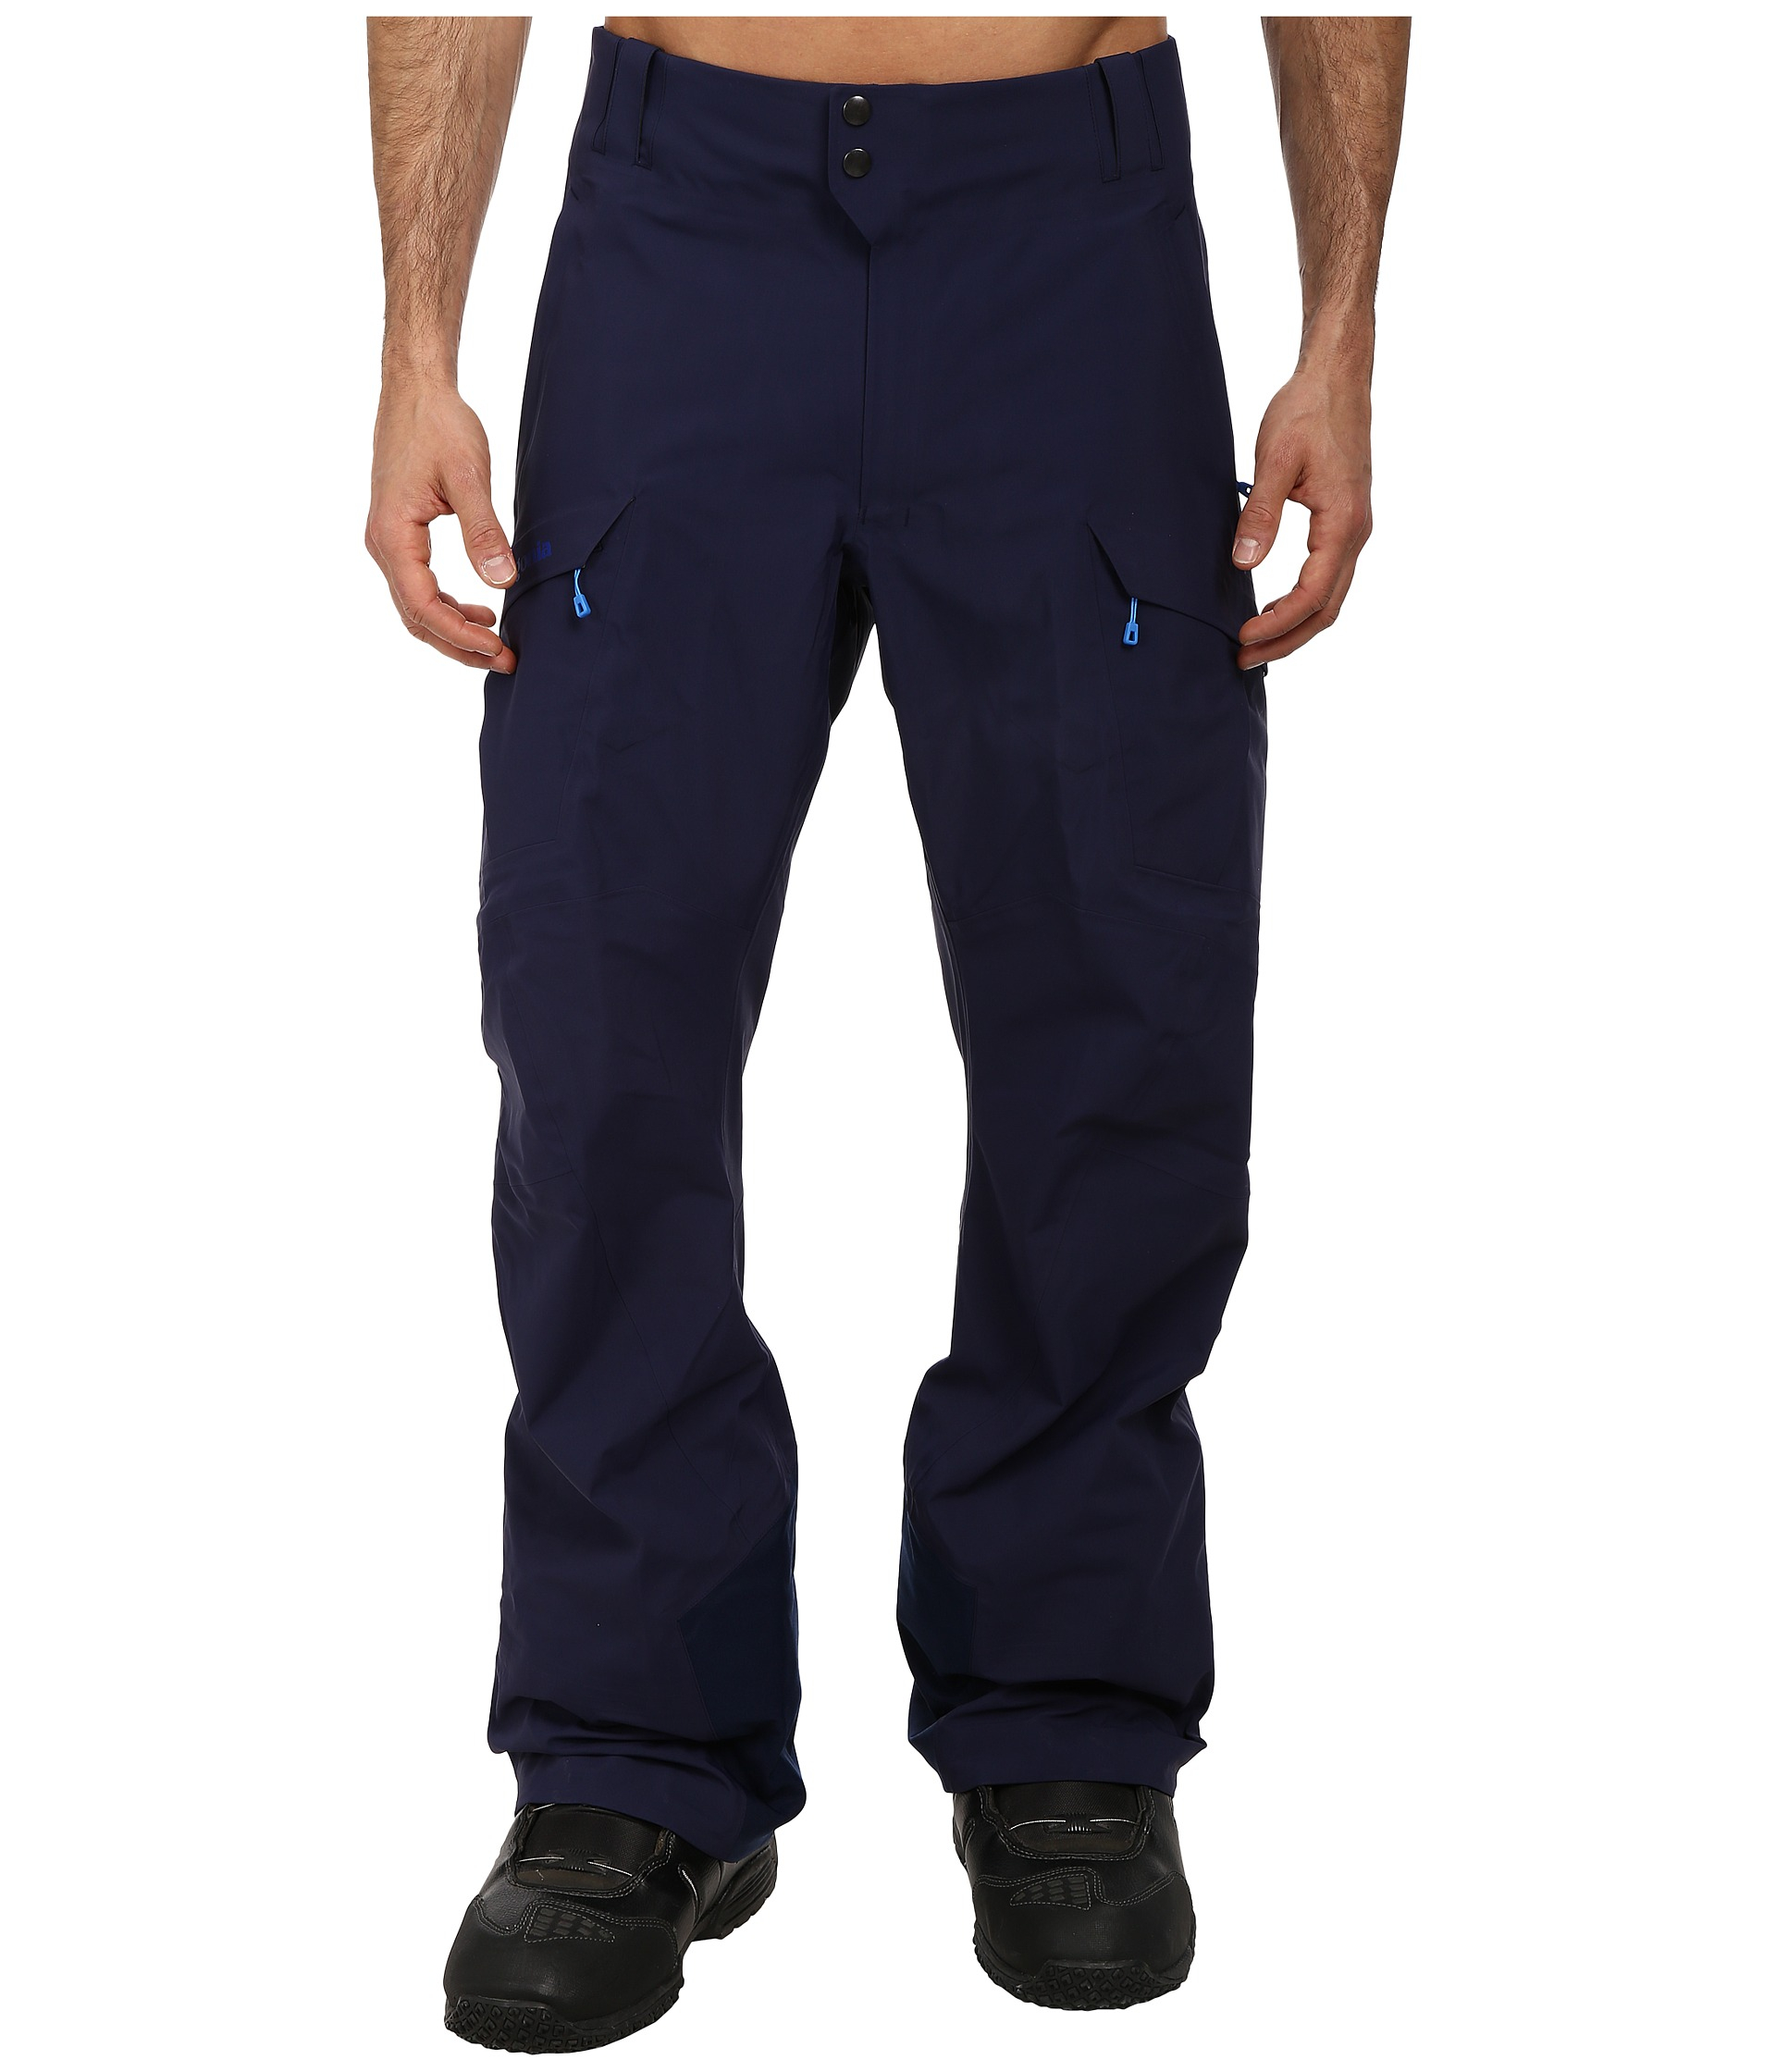 Patagonia Untracked Pants in Blue for Men - Lyst